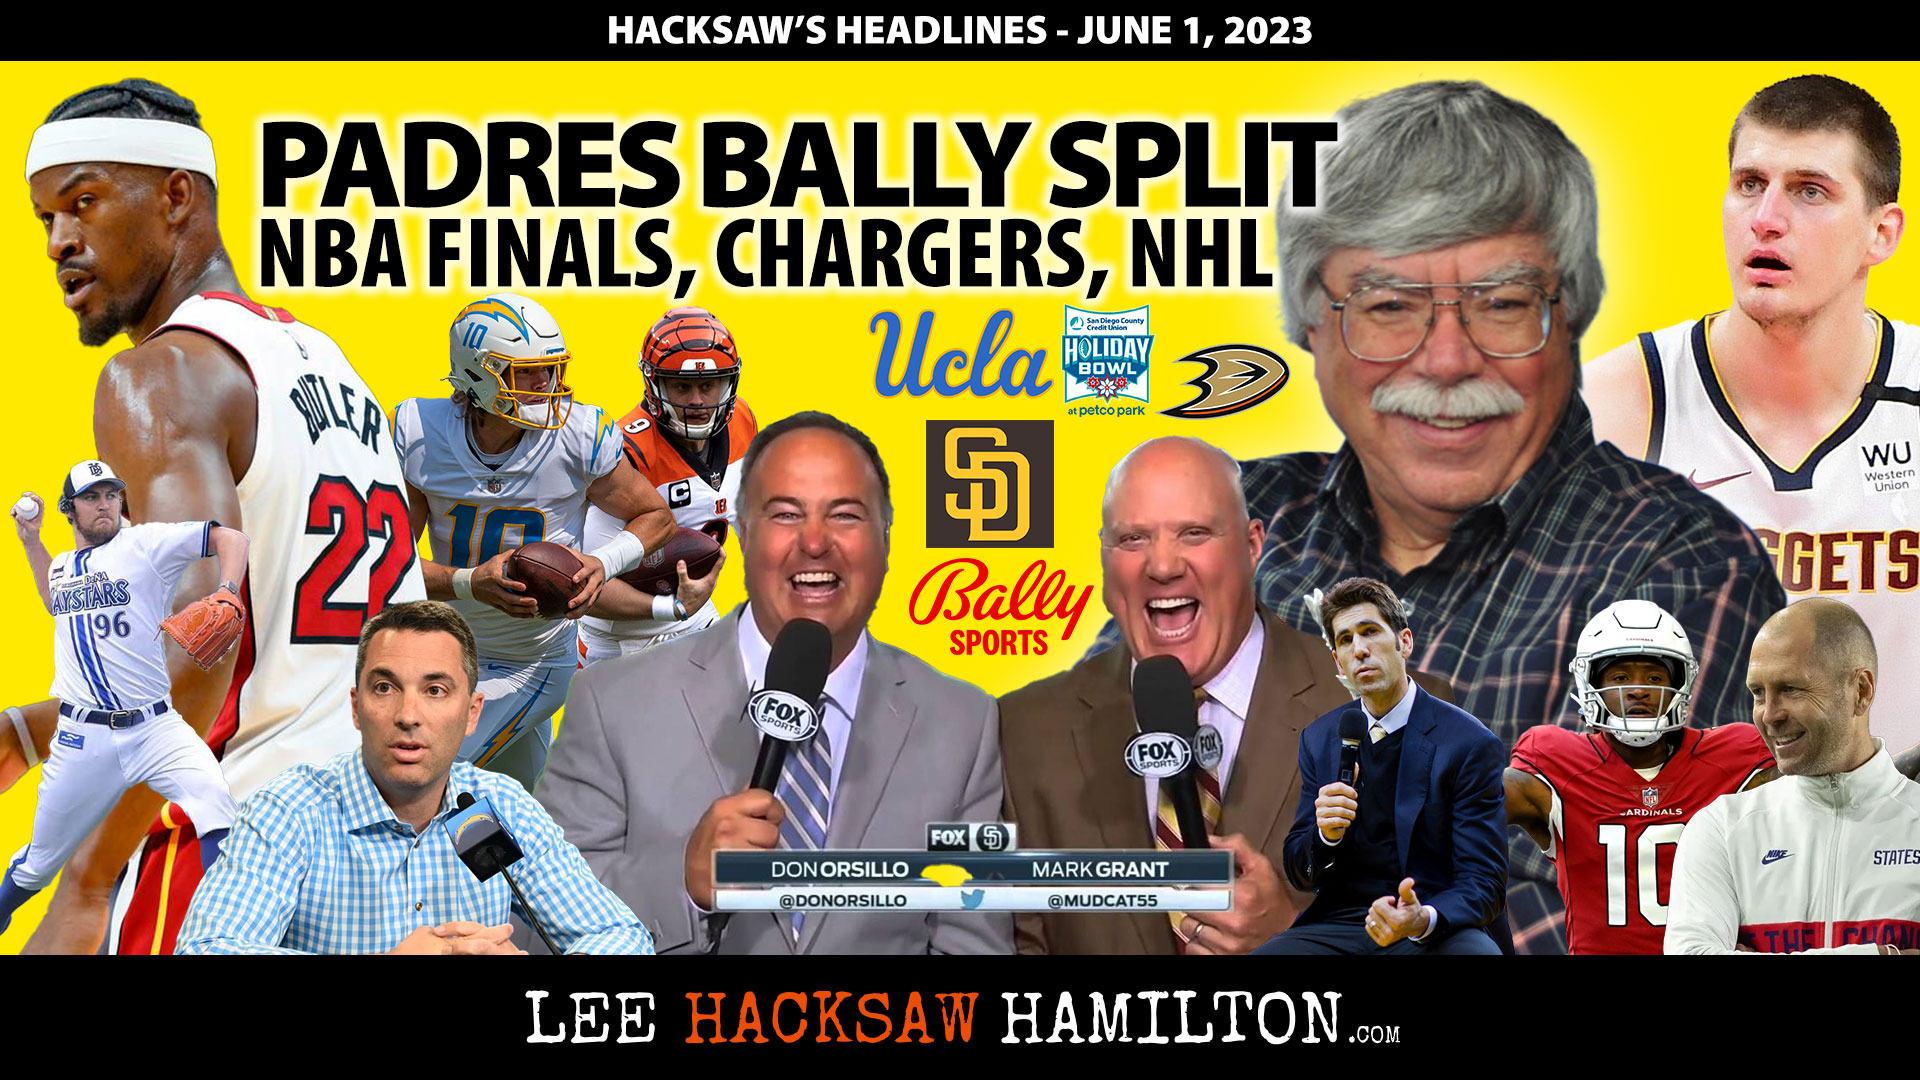 Lee Hacksaw Hamilton discusses Padres/Bally Sports, Chargers, NBA Finals, NBA/NHL Coaches